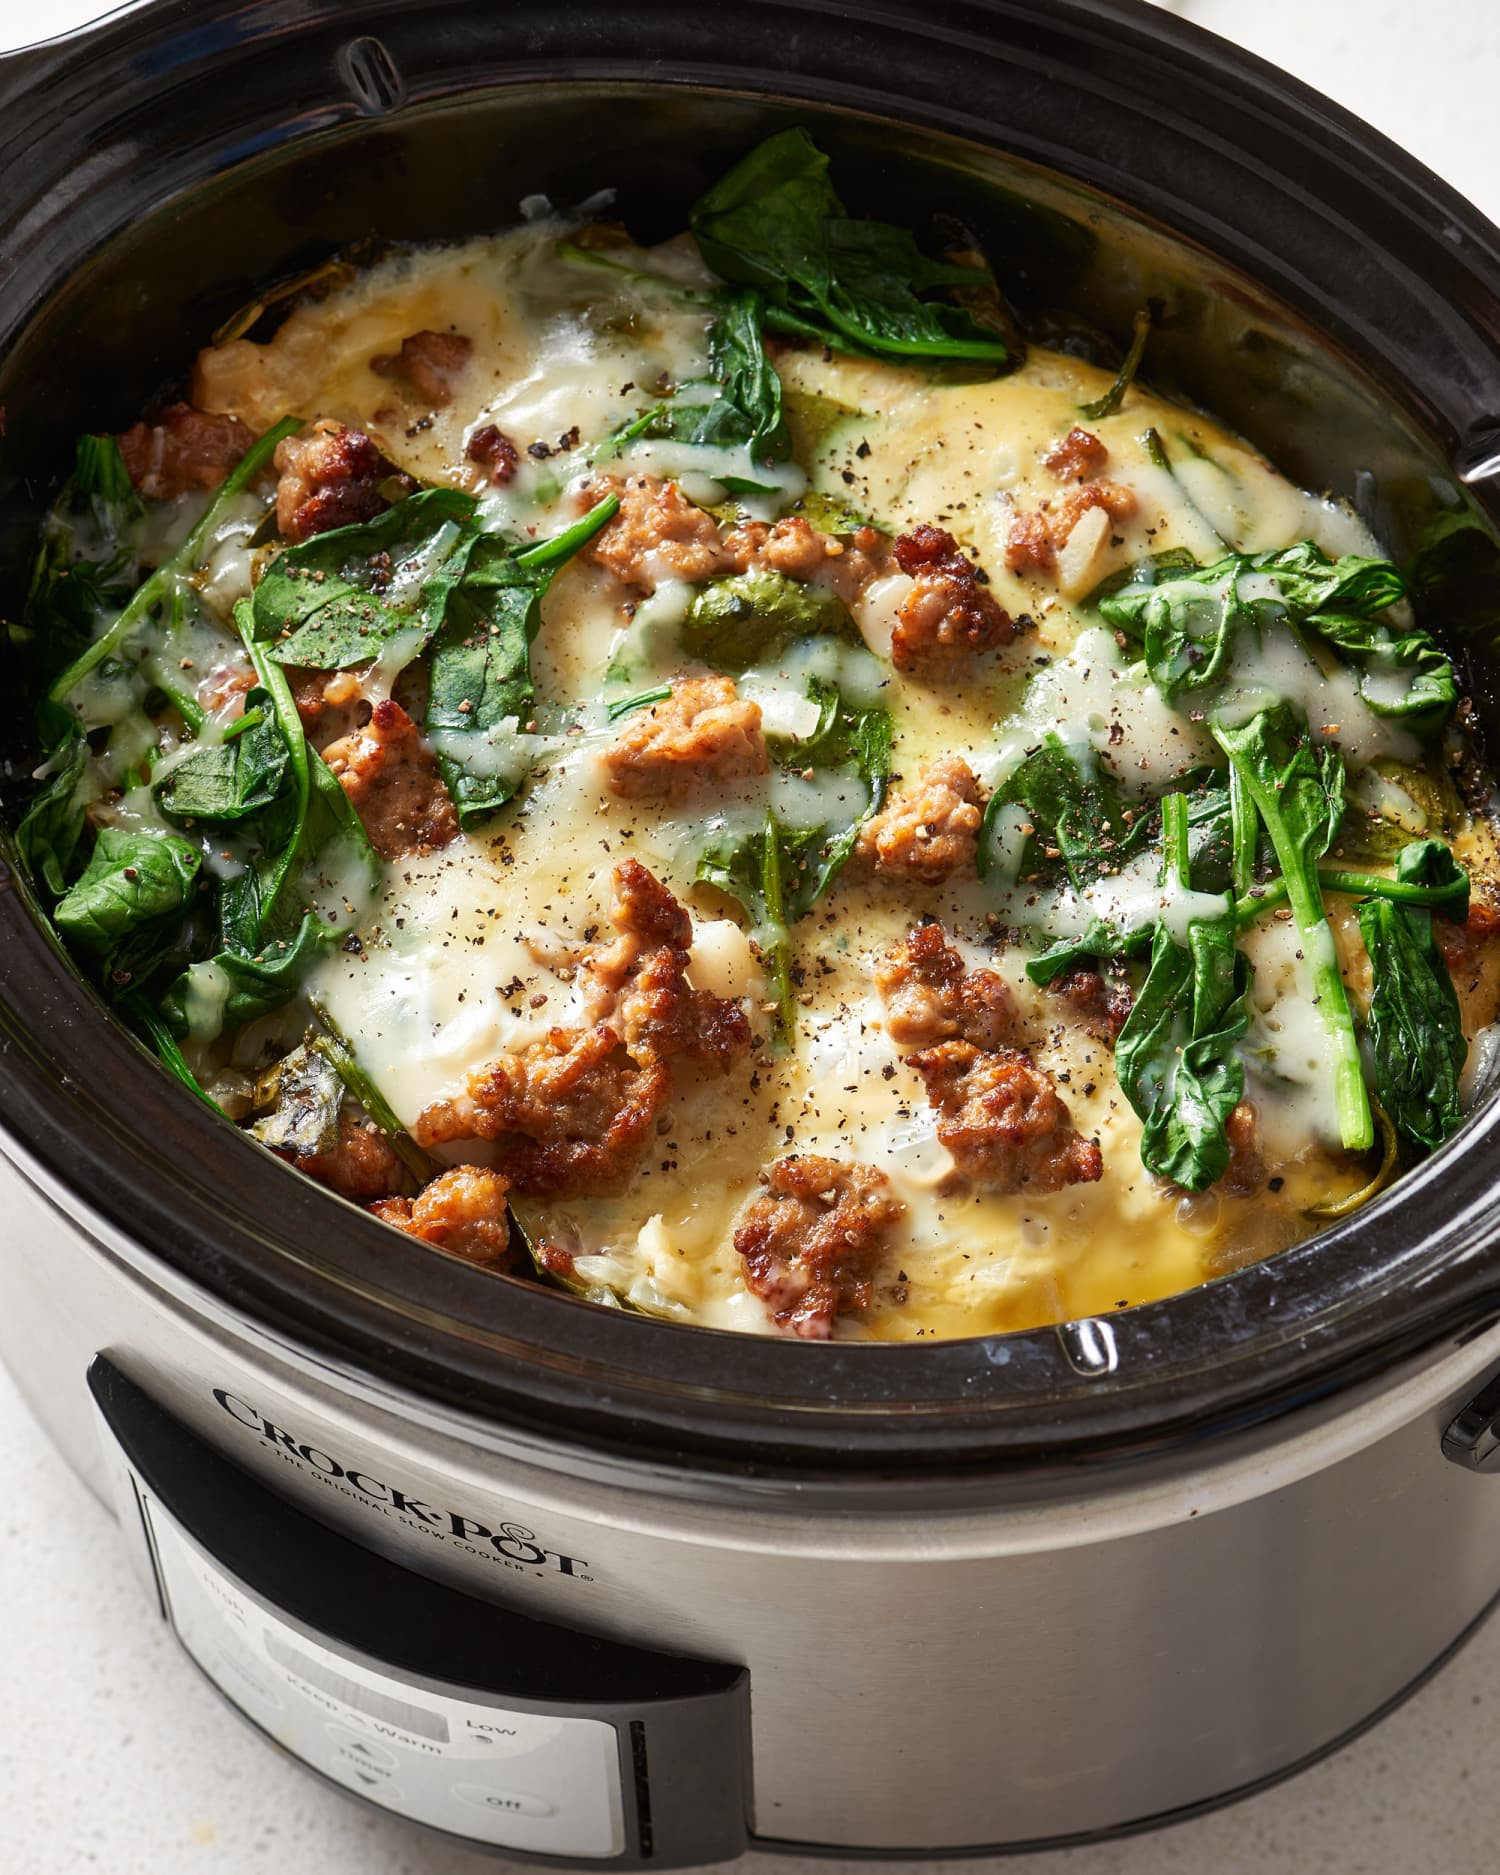 Crockpot Breakfast Casserole With Bread
 5 Tips for Mastering the Slow Cooker Egg Casserole